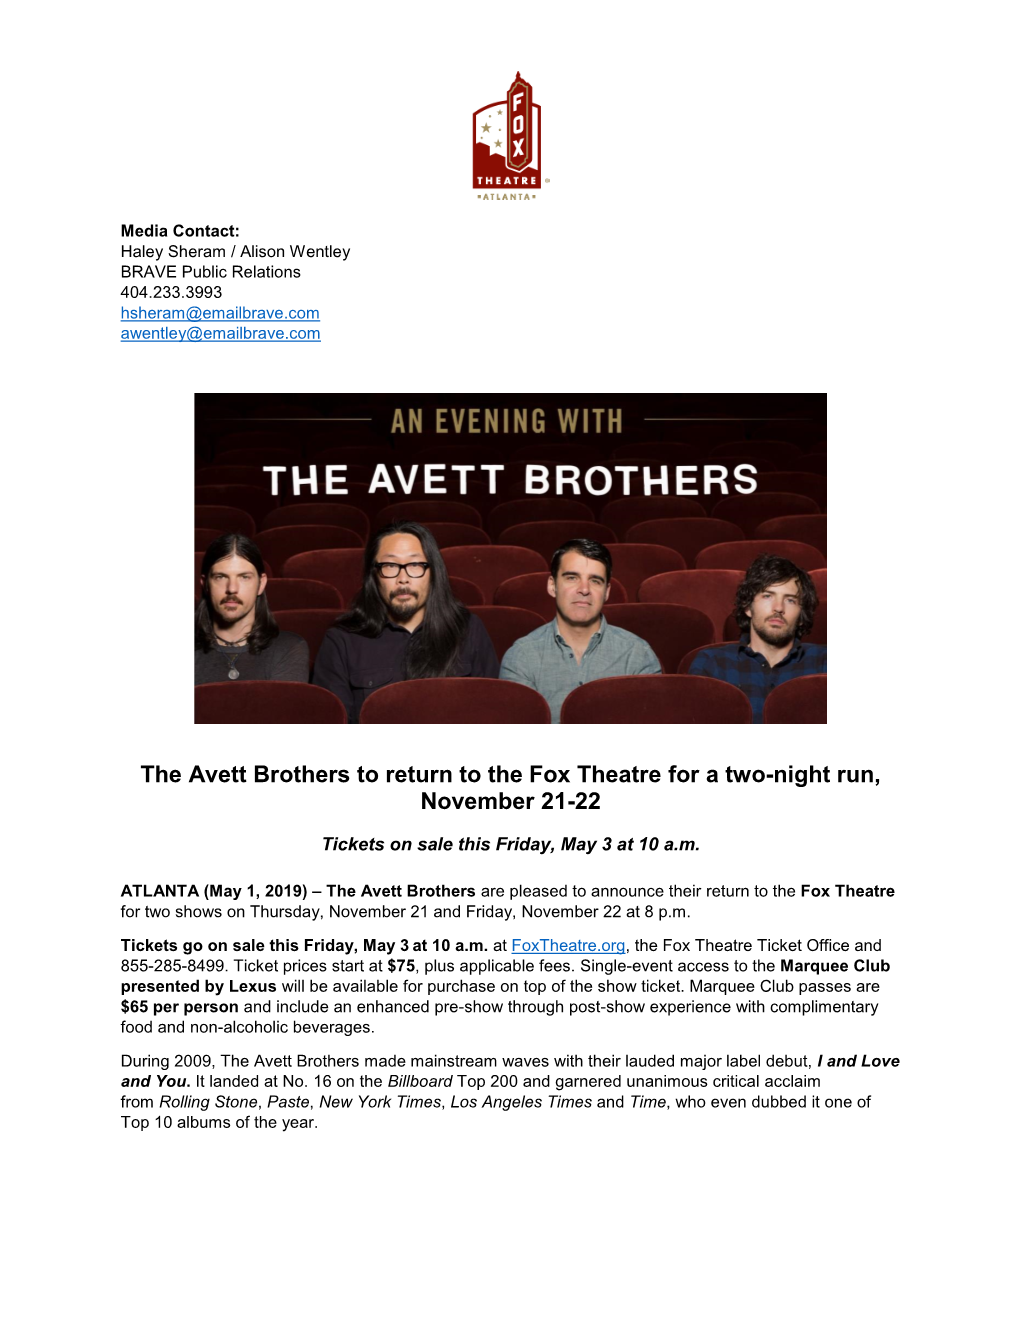 The Avett Brothers to Return to the Fox Theatre for a Two-Night Run, November 21-22